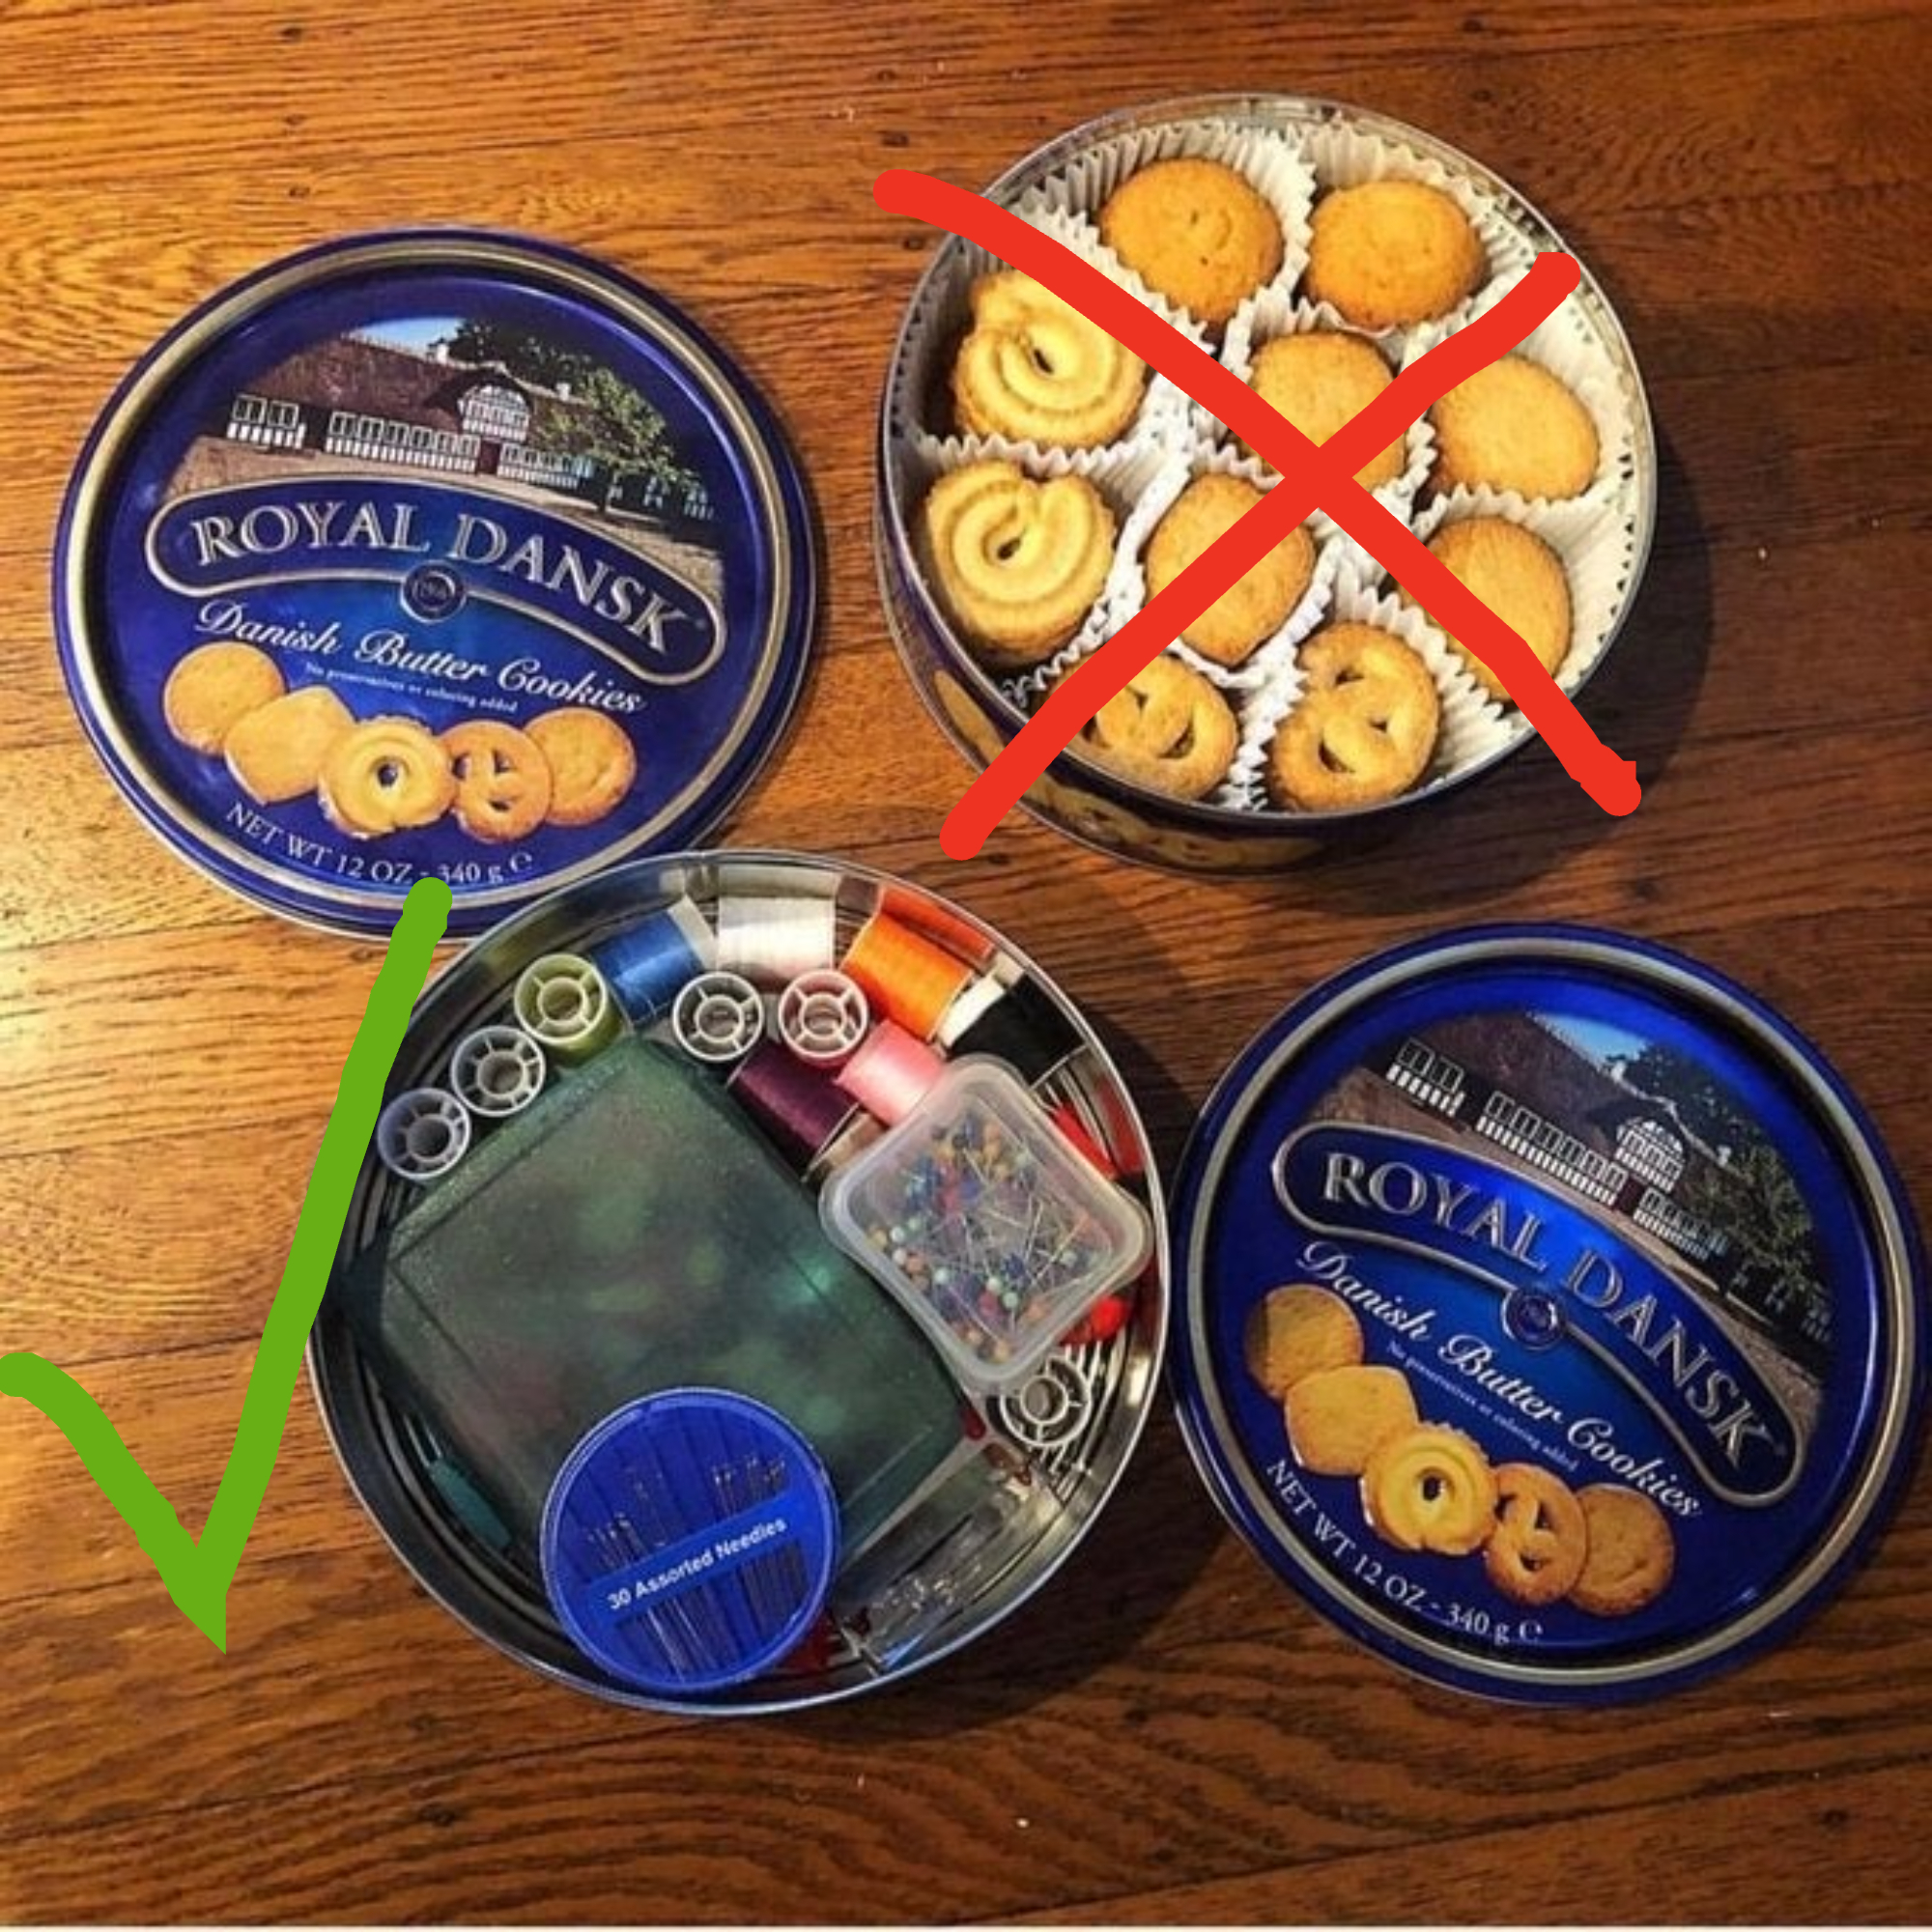 A cookie tin filled with cookies x&#x27;ed out, and one with sewing accessories